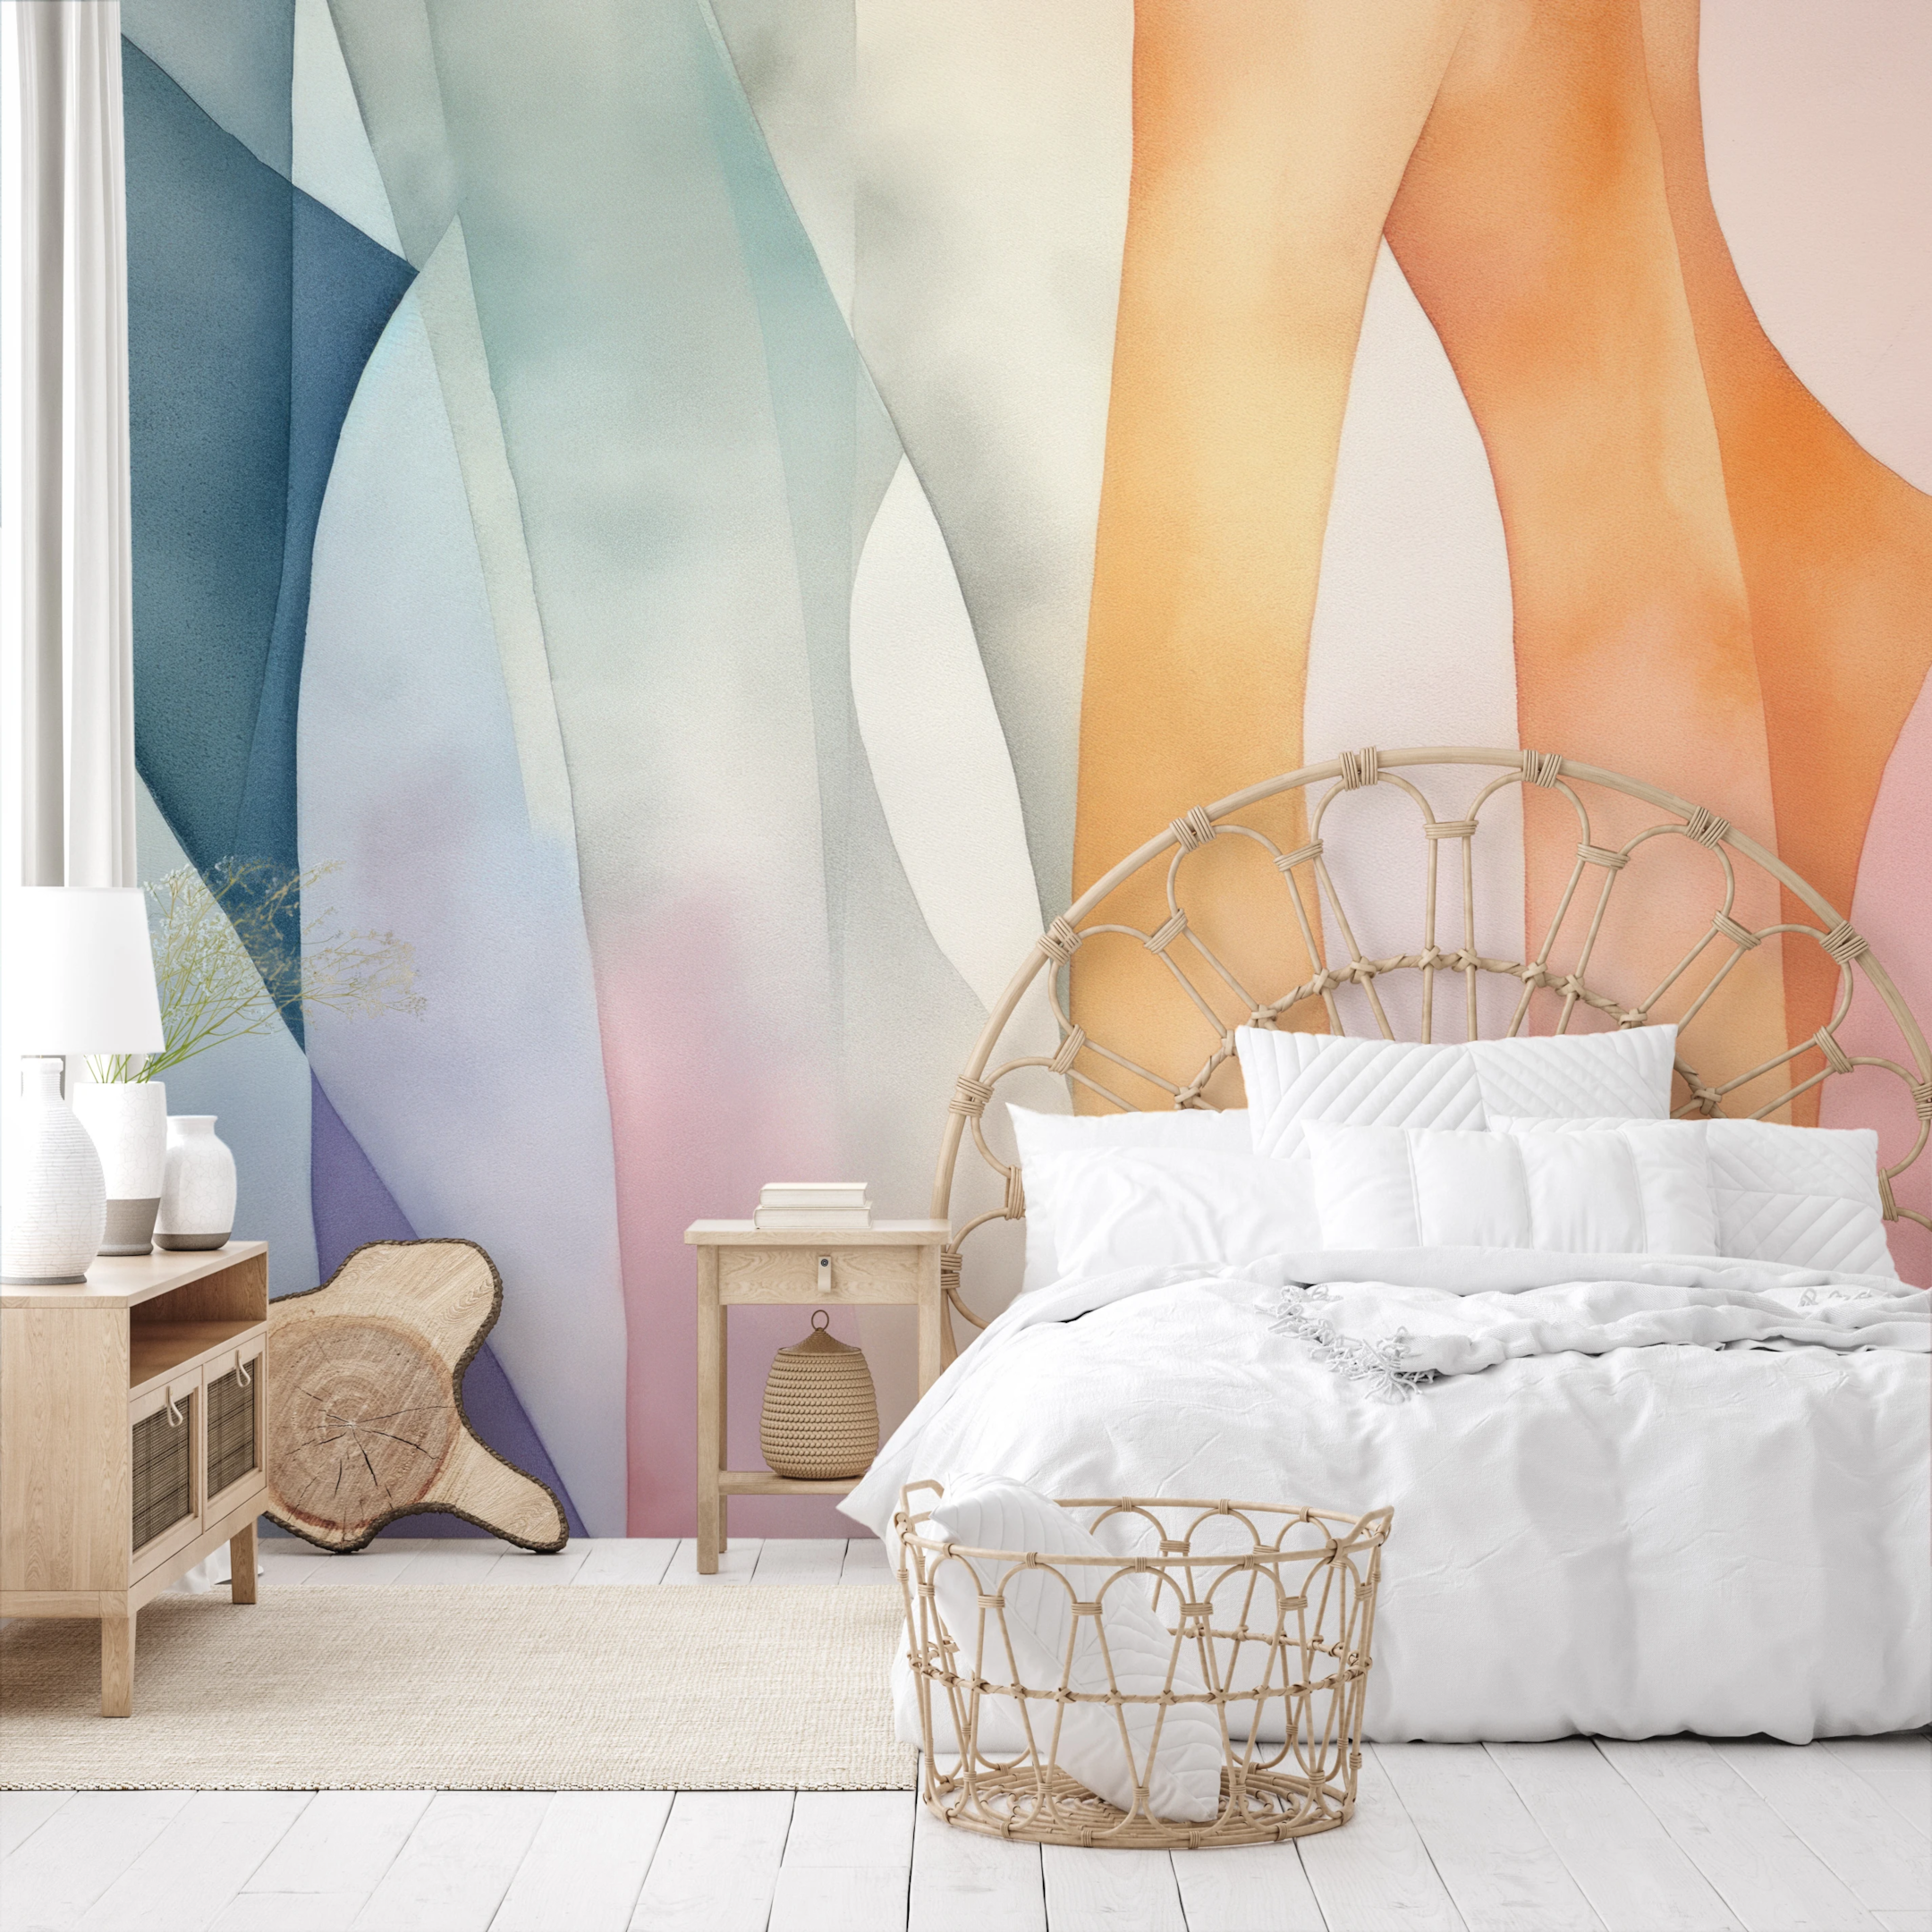 One of the Decomura photo wallpaper patterns from the "Gentle Aura" collection